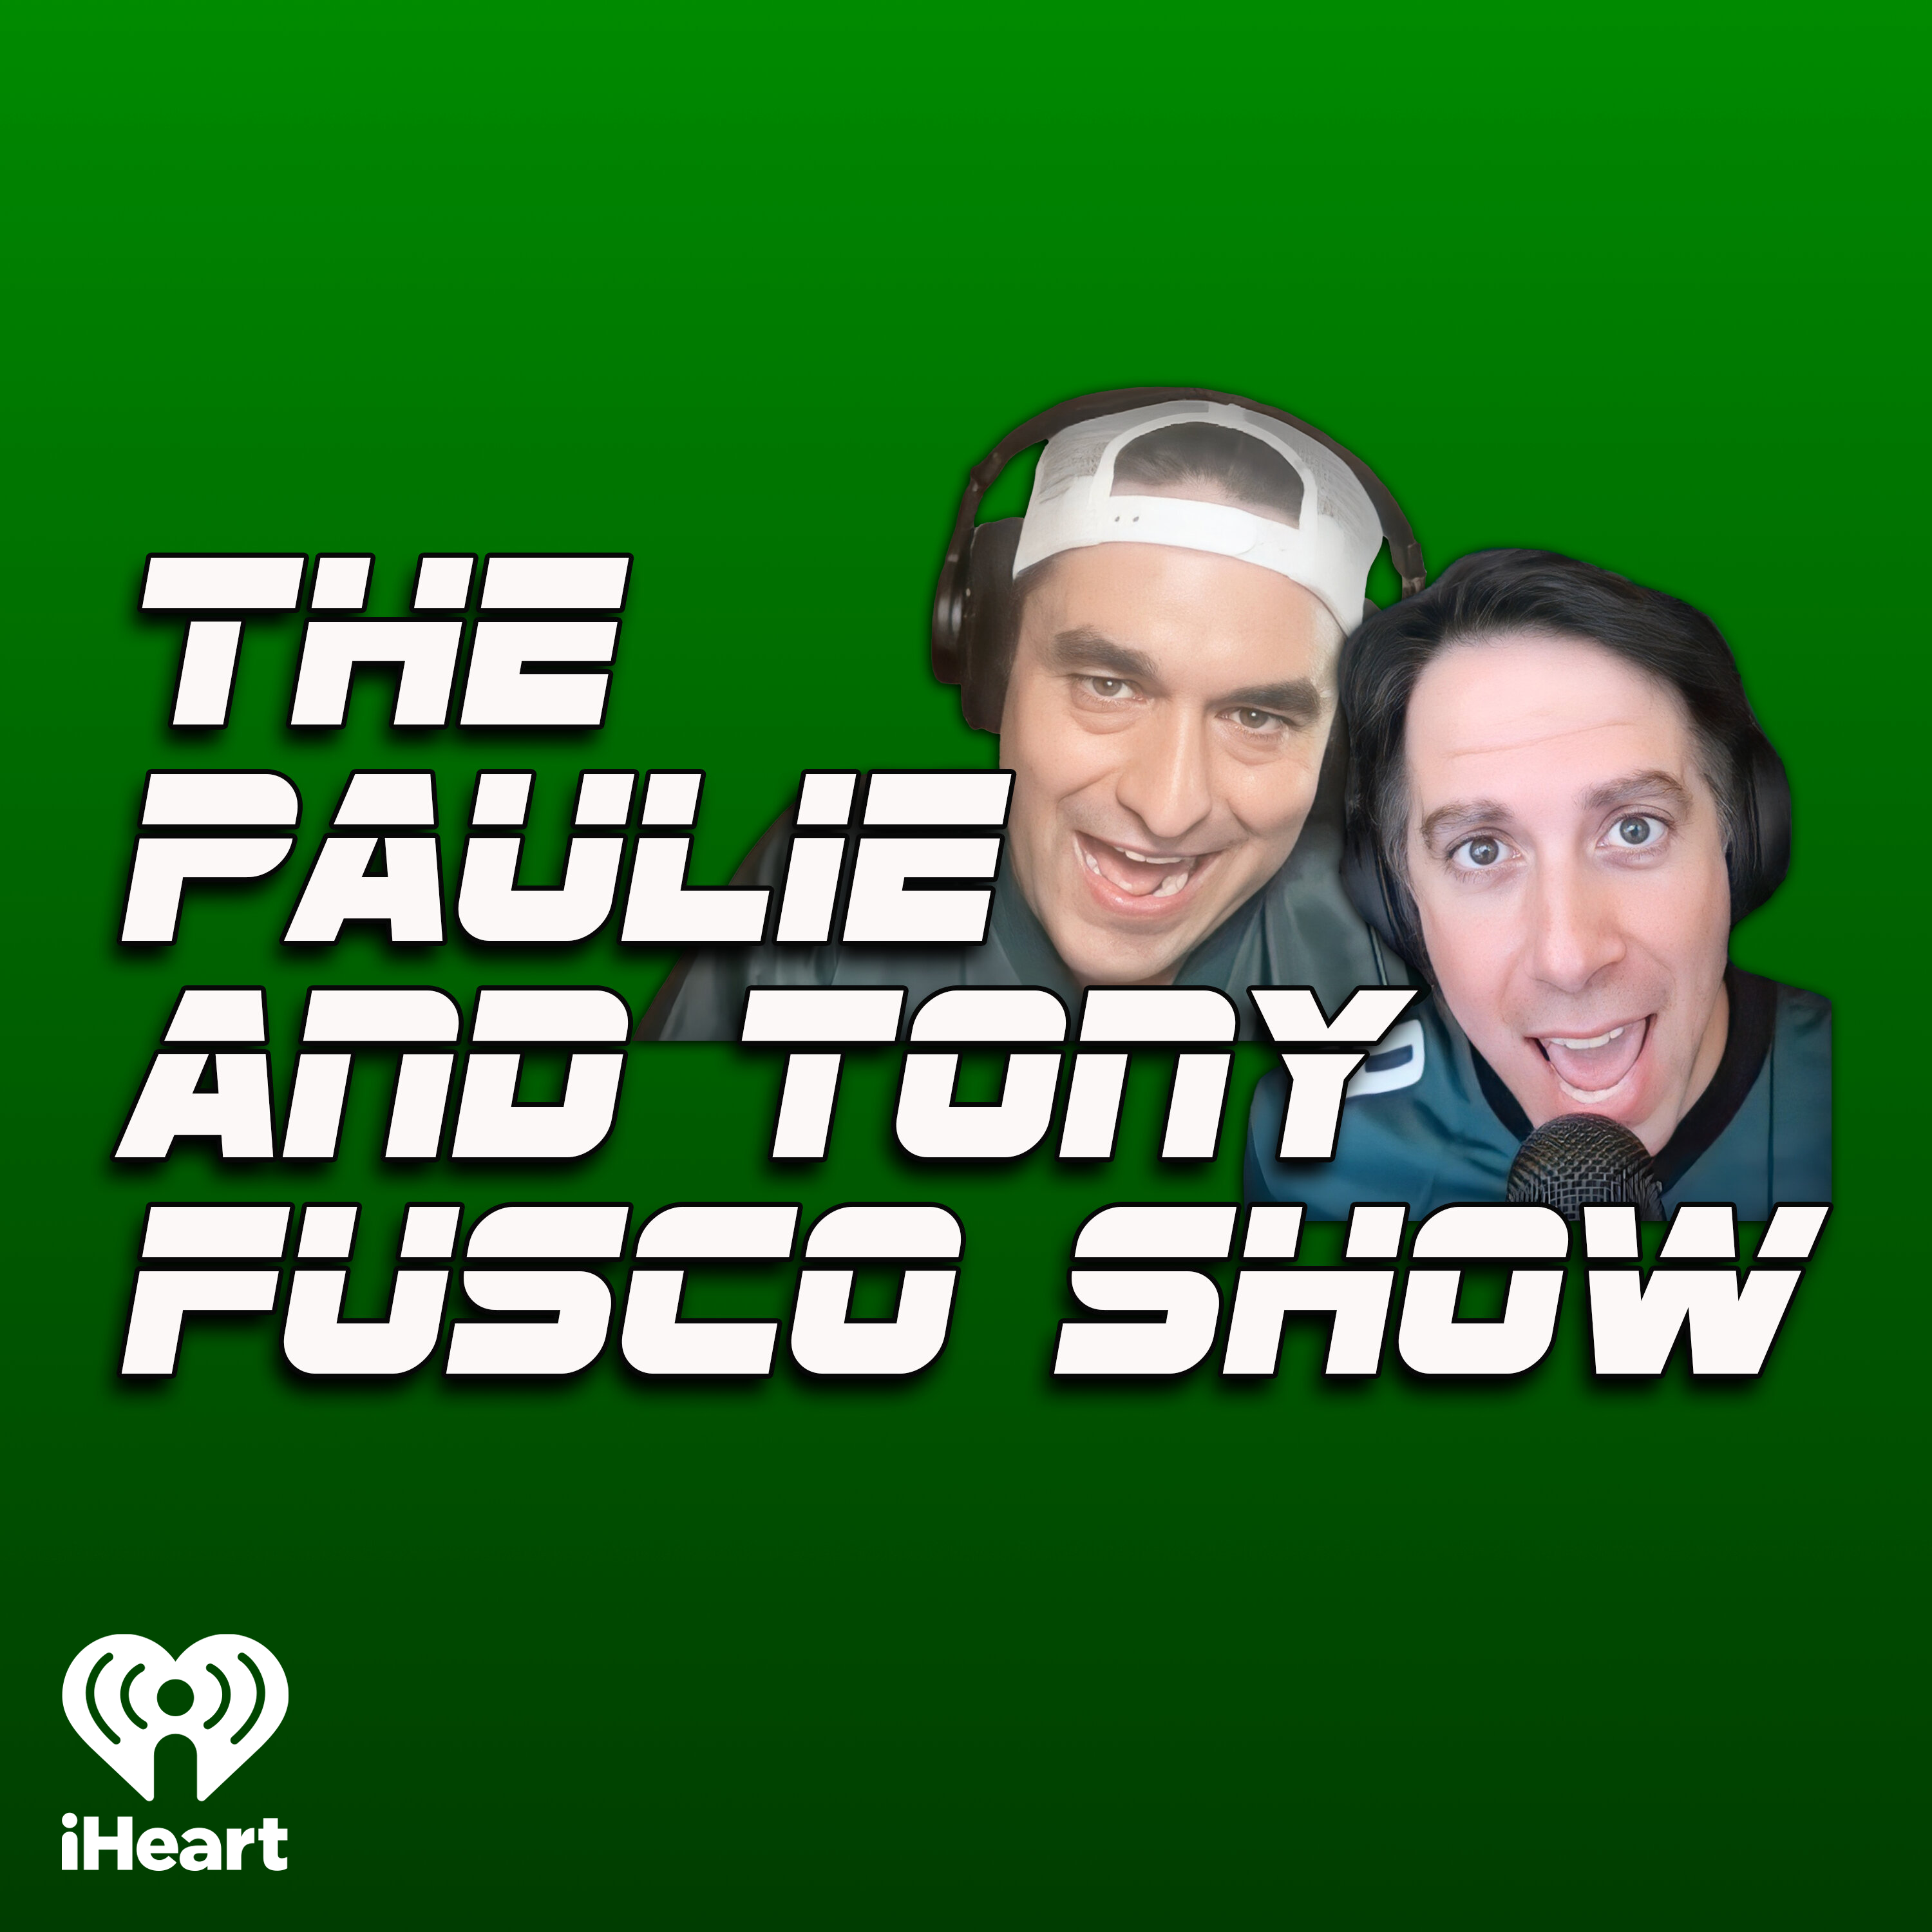 The Paulie & Tony Fusco Show: NBA legend Kenyon Martin GETS KICKED OFF SHOW for HORRIBLE takes, NFL makes STUPID move